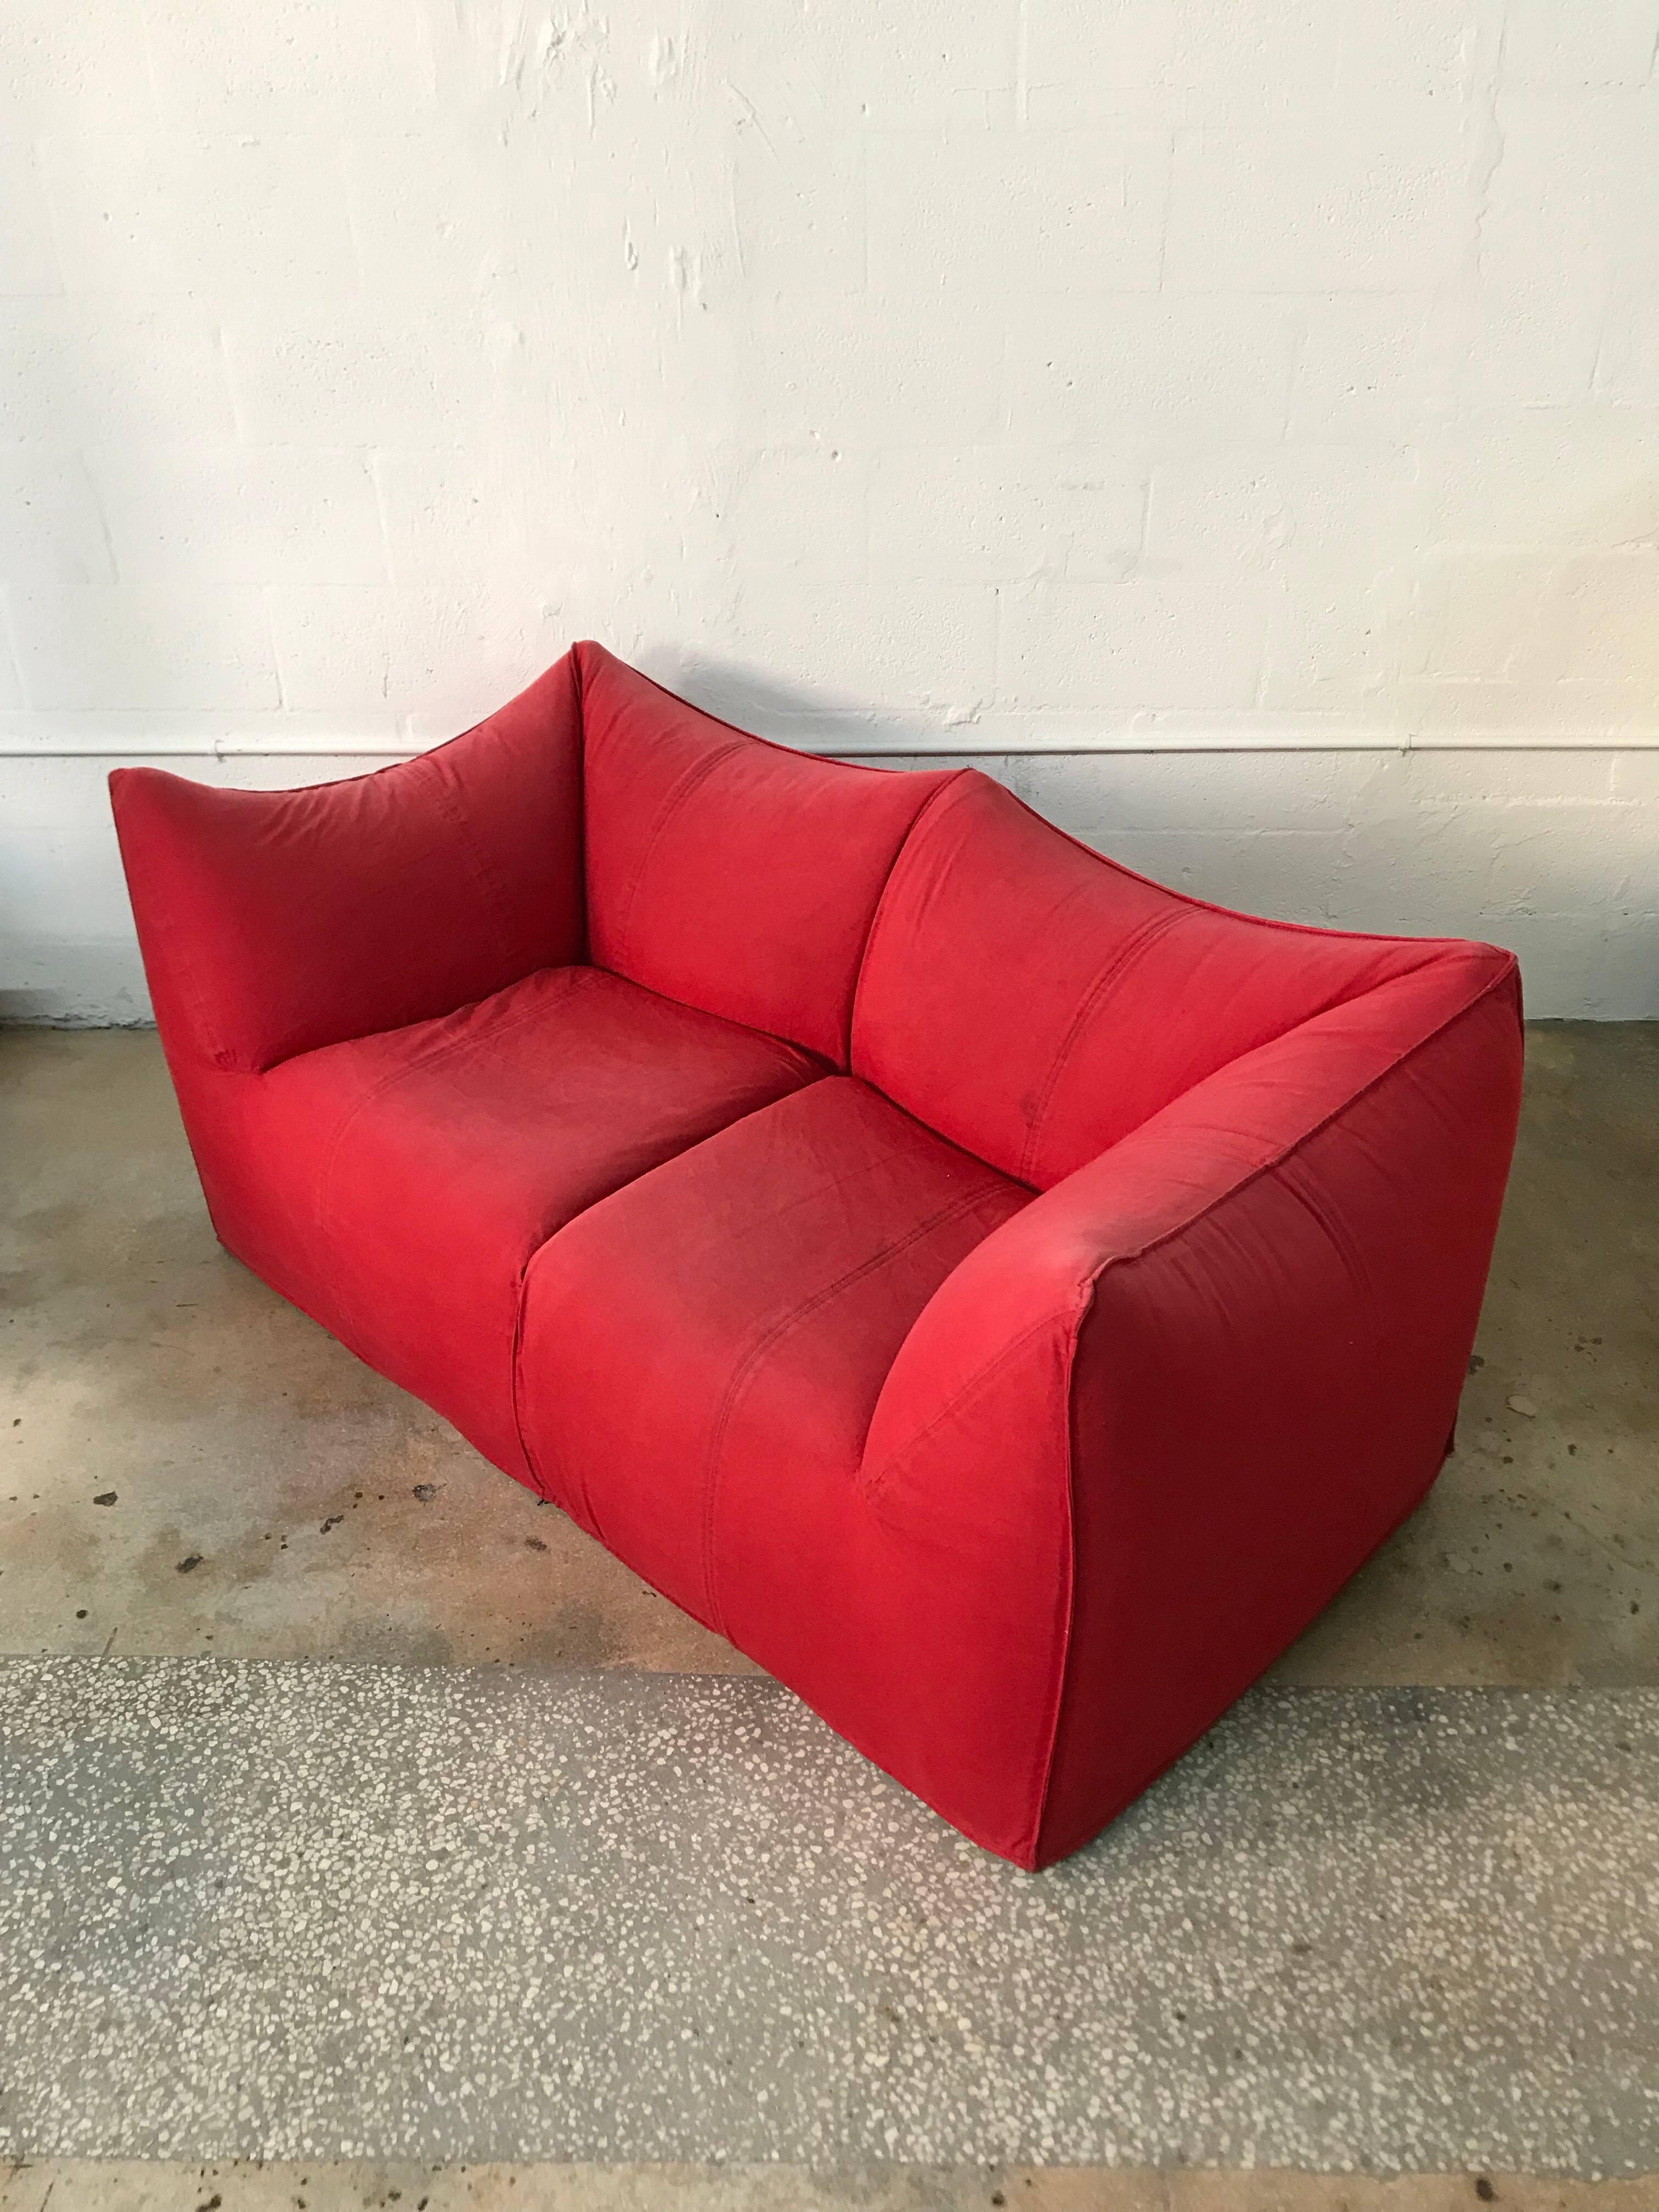 Original vintage ale Bambole two-seat sofa or loveseat designed by Mario Bellini for B&B Italia, rendered in Canvas over foam. Sofa is in original fabric, reupholstery in COM is included, please contact dealer for reupholstery or customization